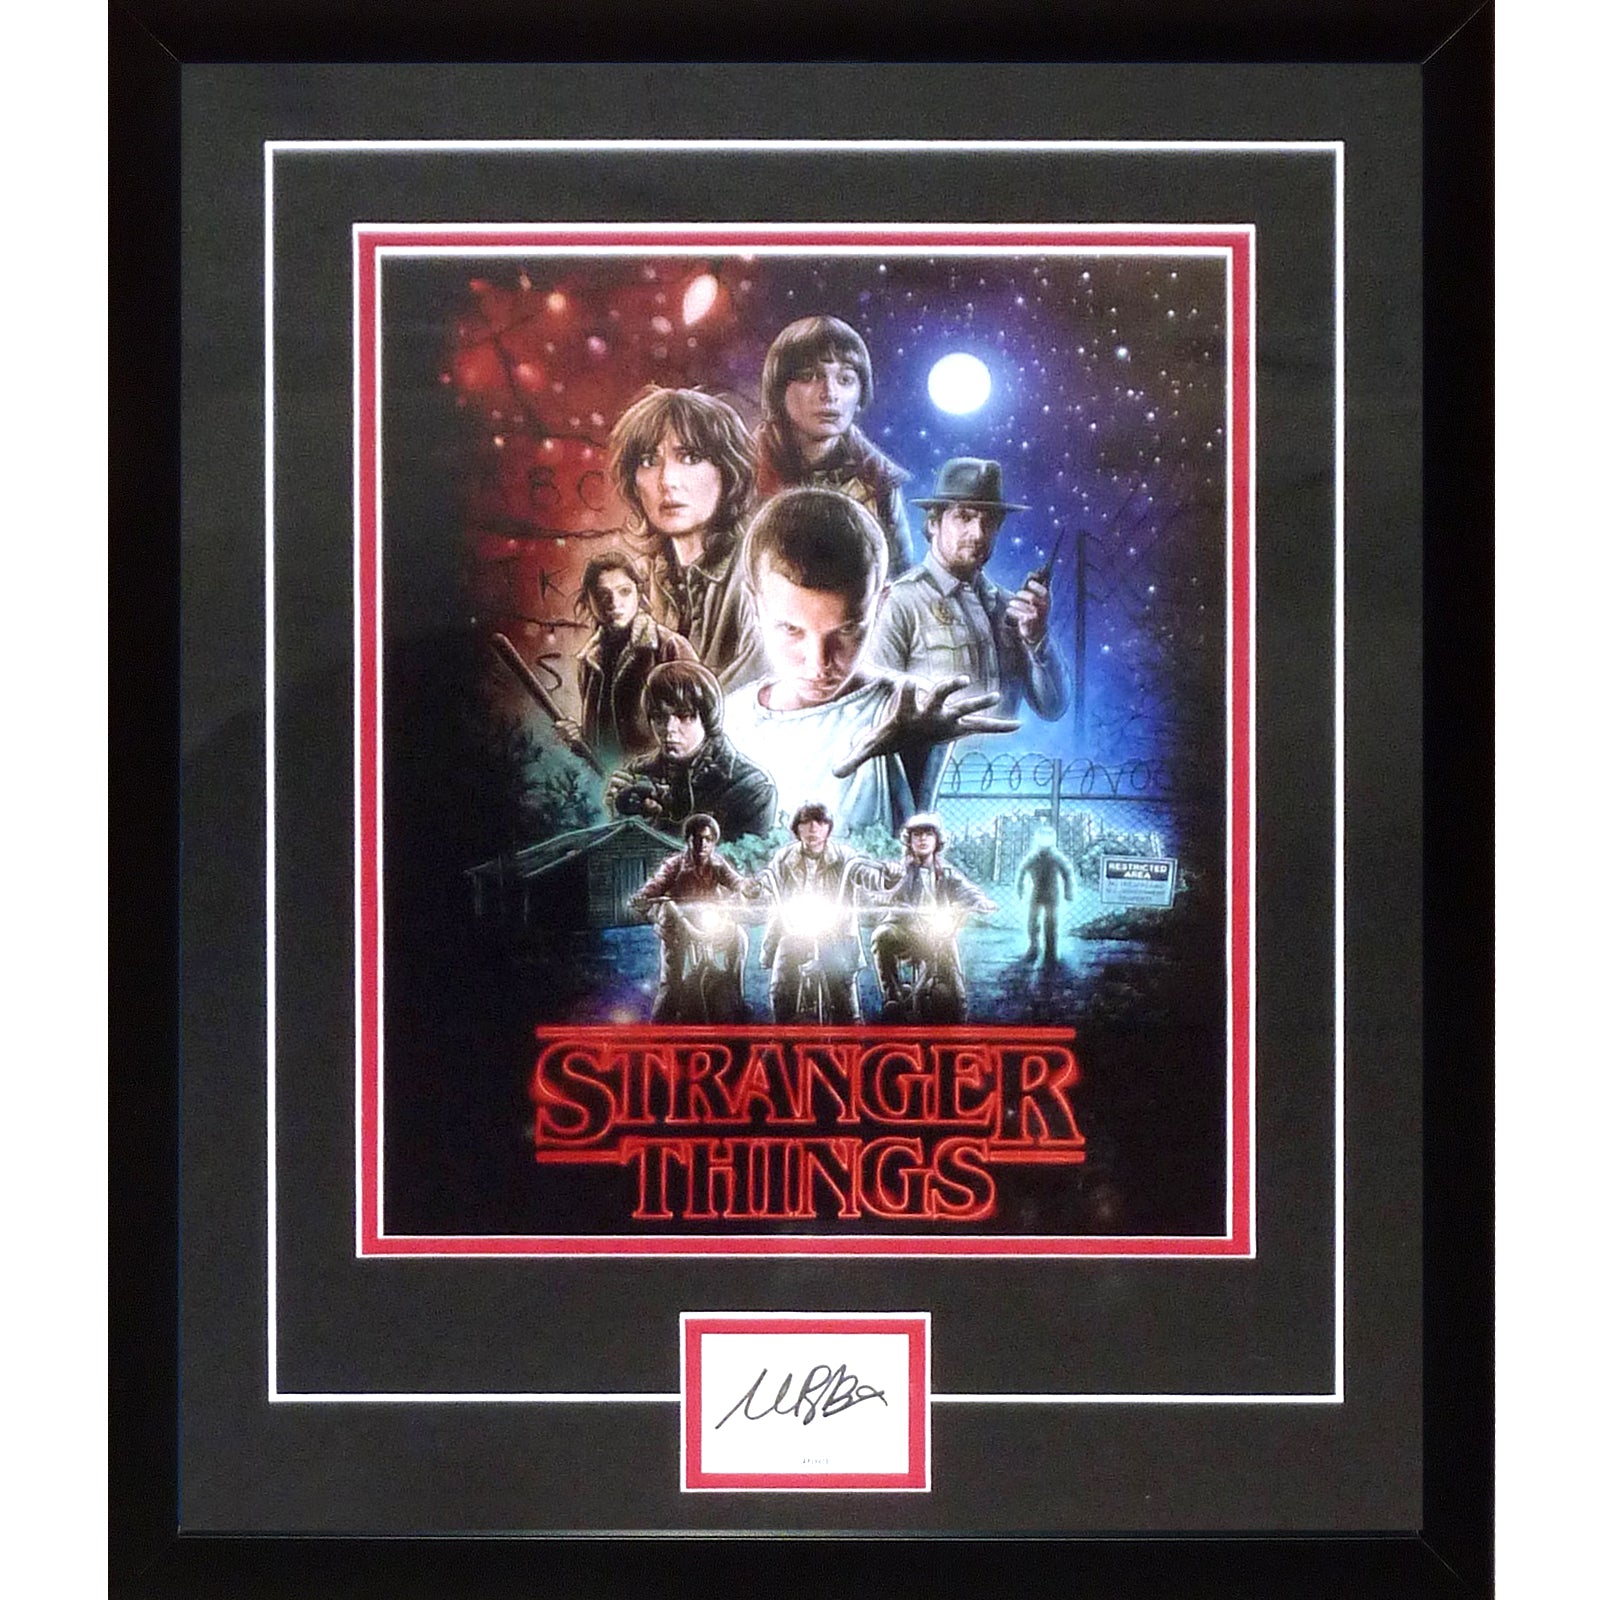 Stranger Things 11x14 TV Poster Deluxe Framed with Millie Bobby Brown Autograph - JSA